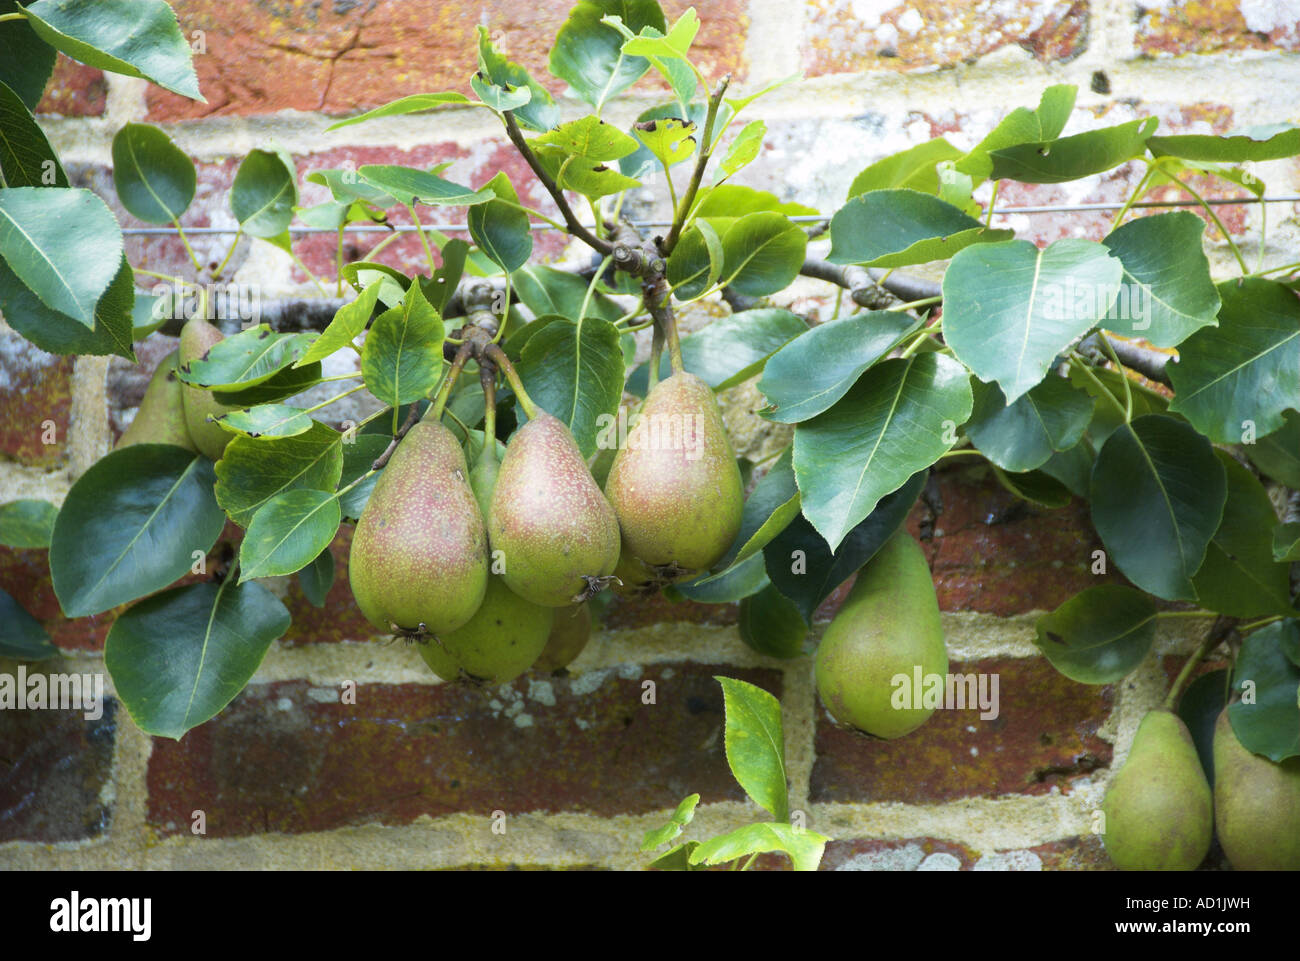 trained espalier Pear vicar of winkfield ripening fruit growing in walled garden England August Stock Photo